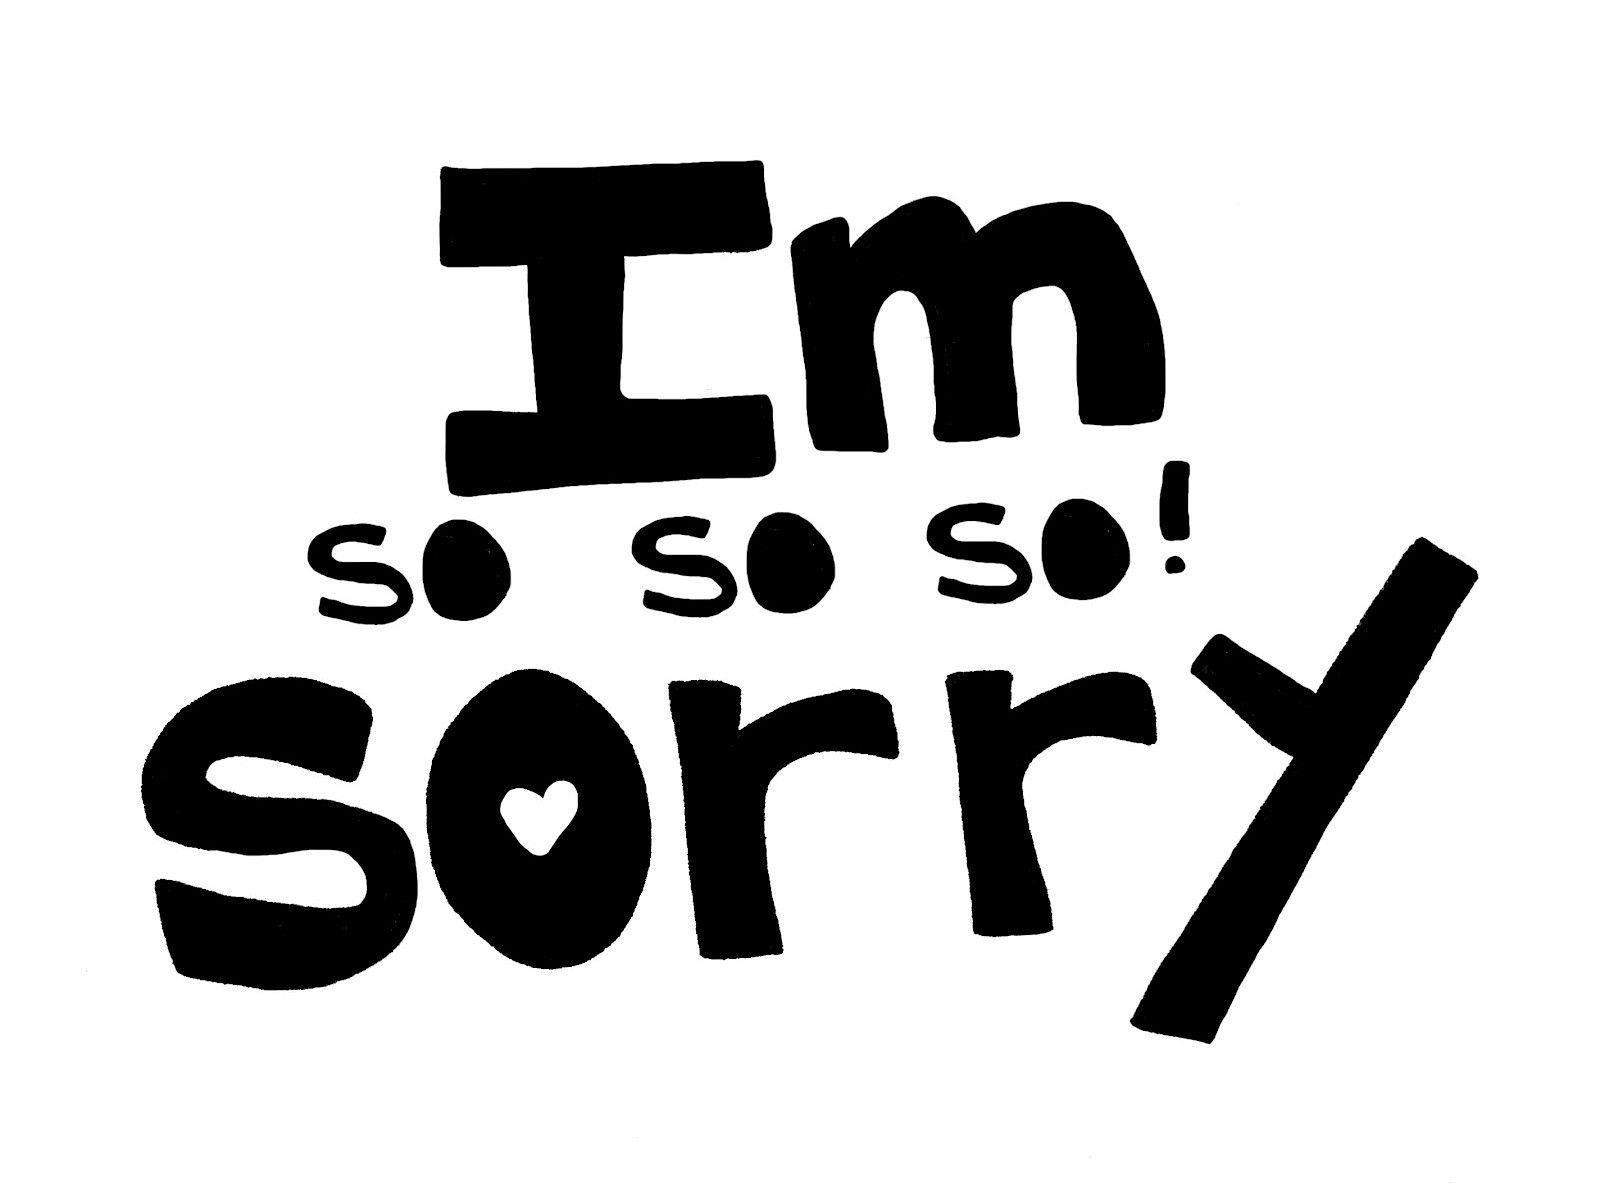 Image Sorry Pichers Hd Fresh I Am Sorry Hd Wallpapers For Desktop